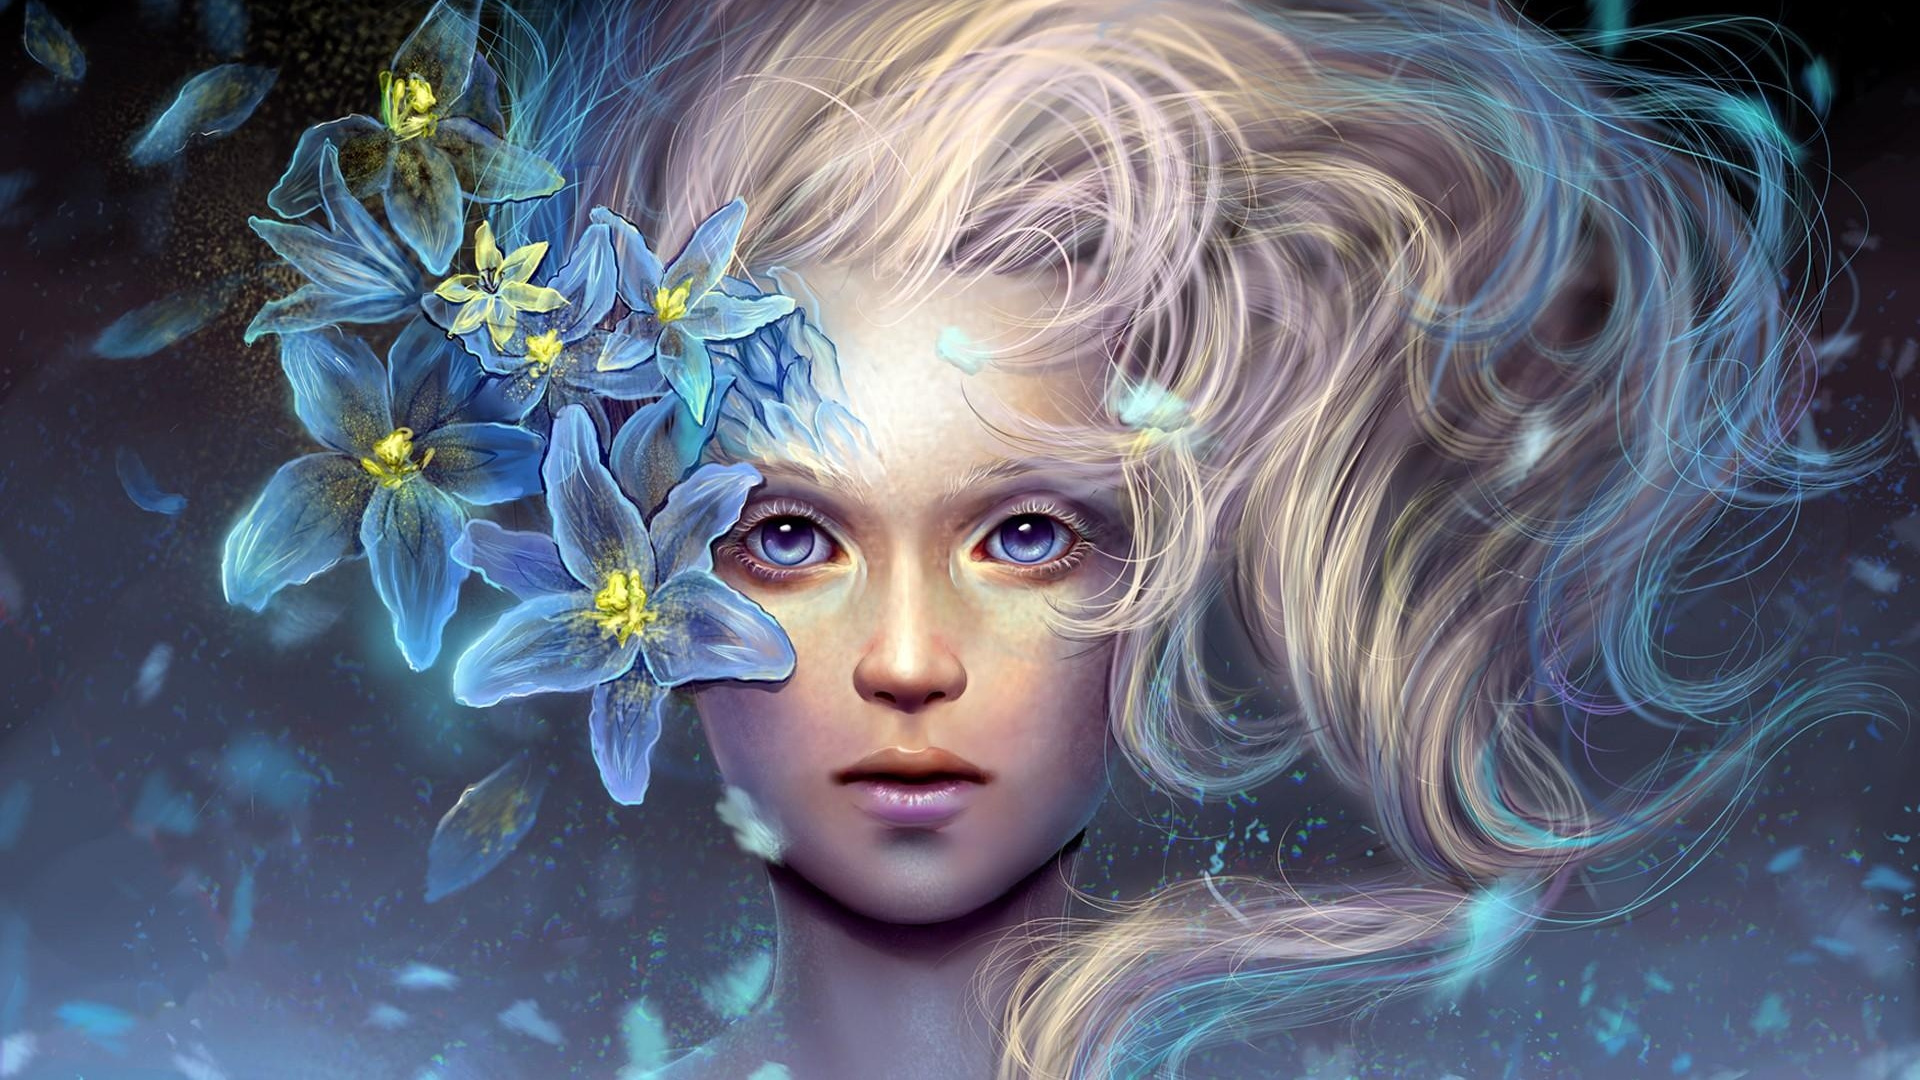 Girl With Blue Flower on Her Hair. Wallpaper in 1920x1080 Resolution